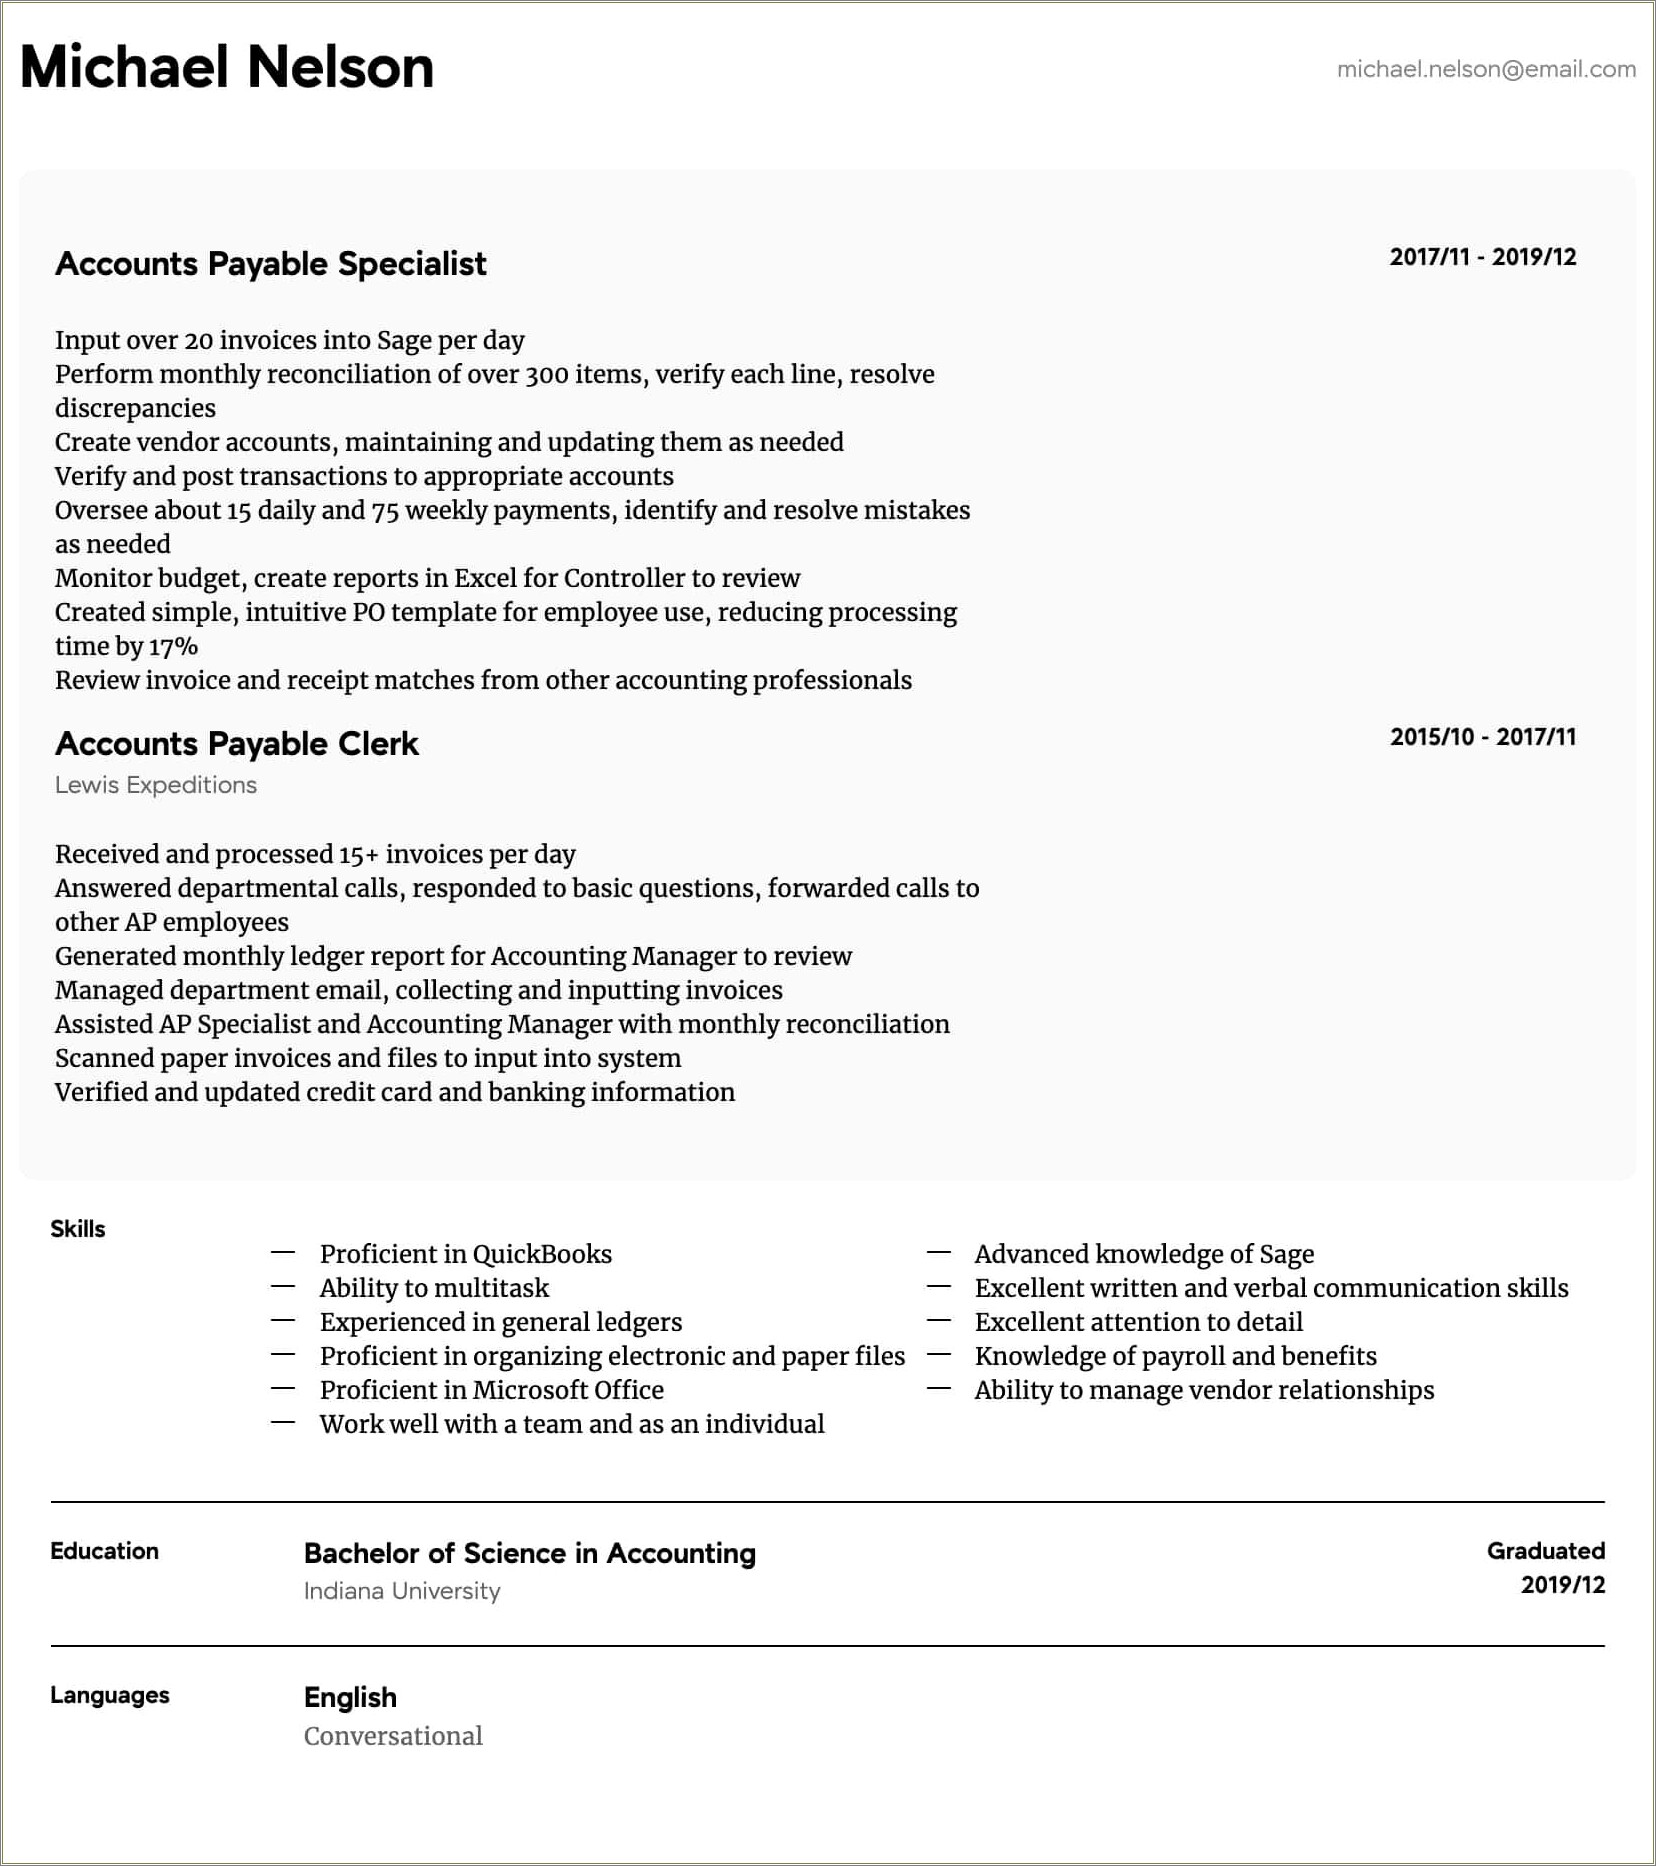 Career Objective For Resume For Accounts Payable